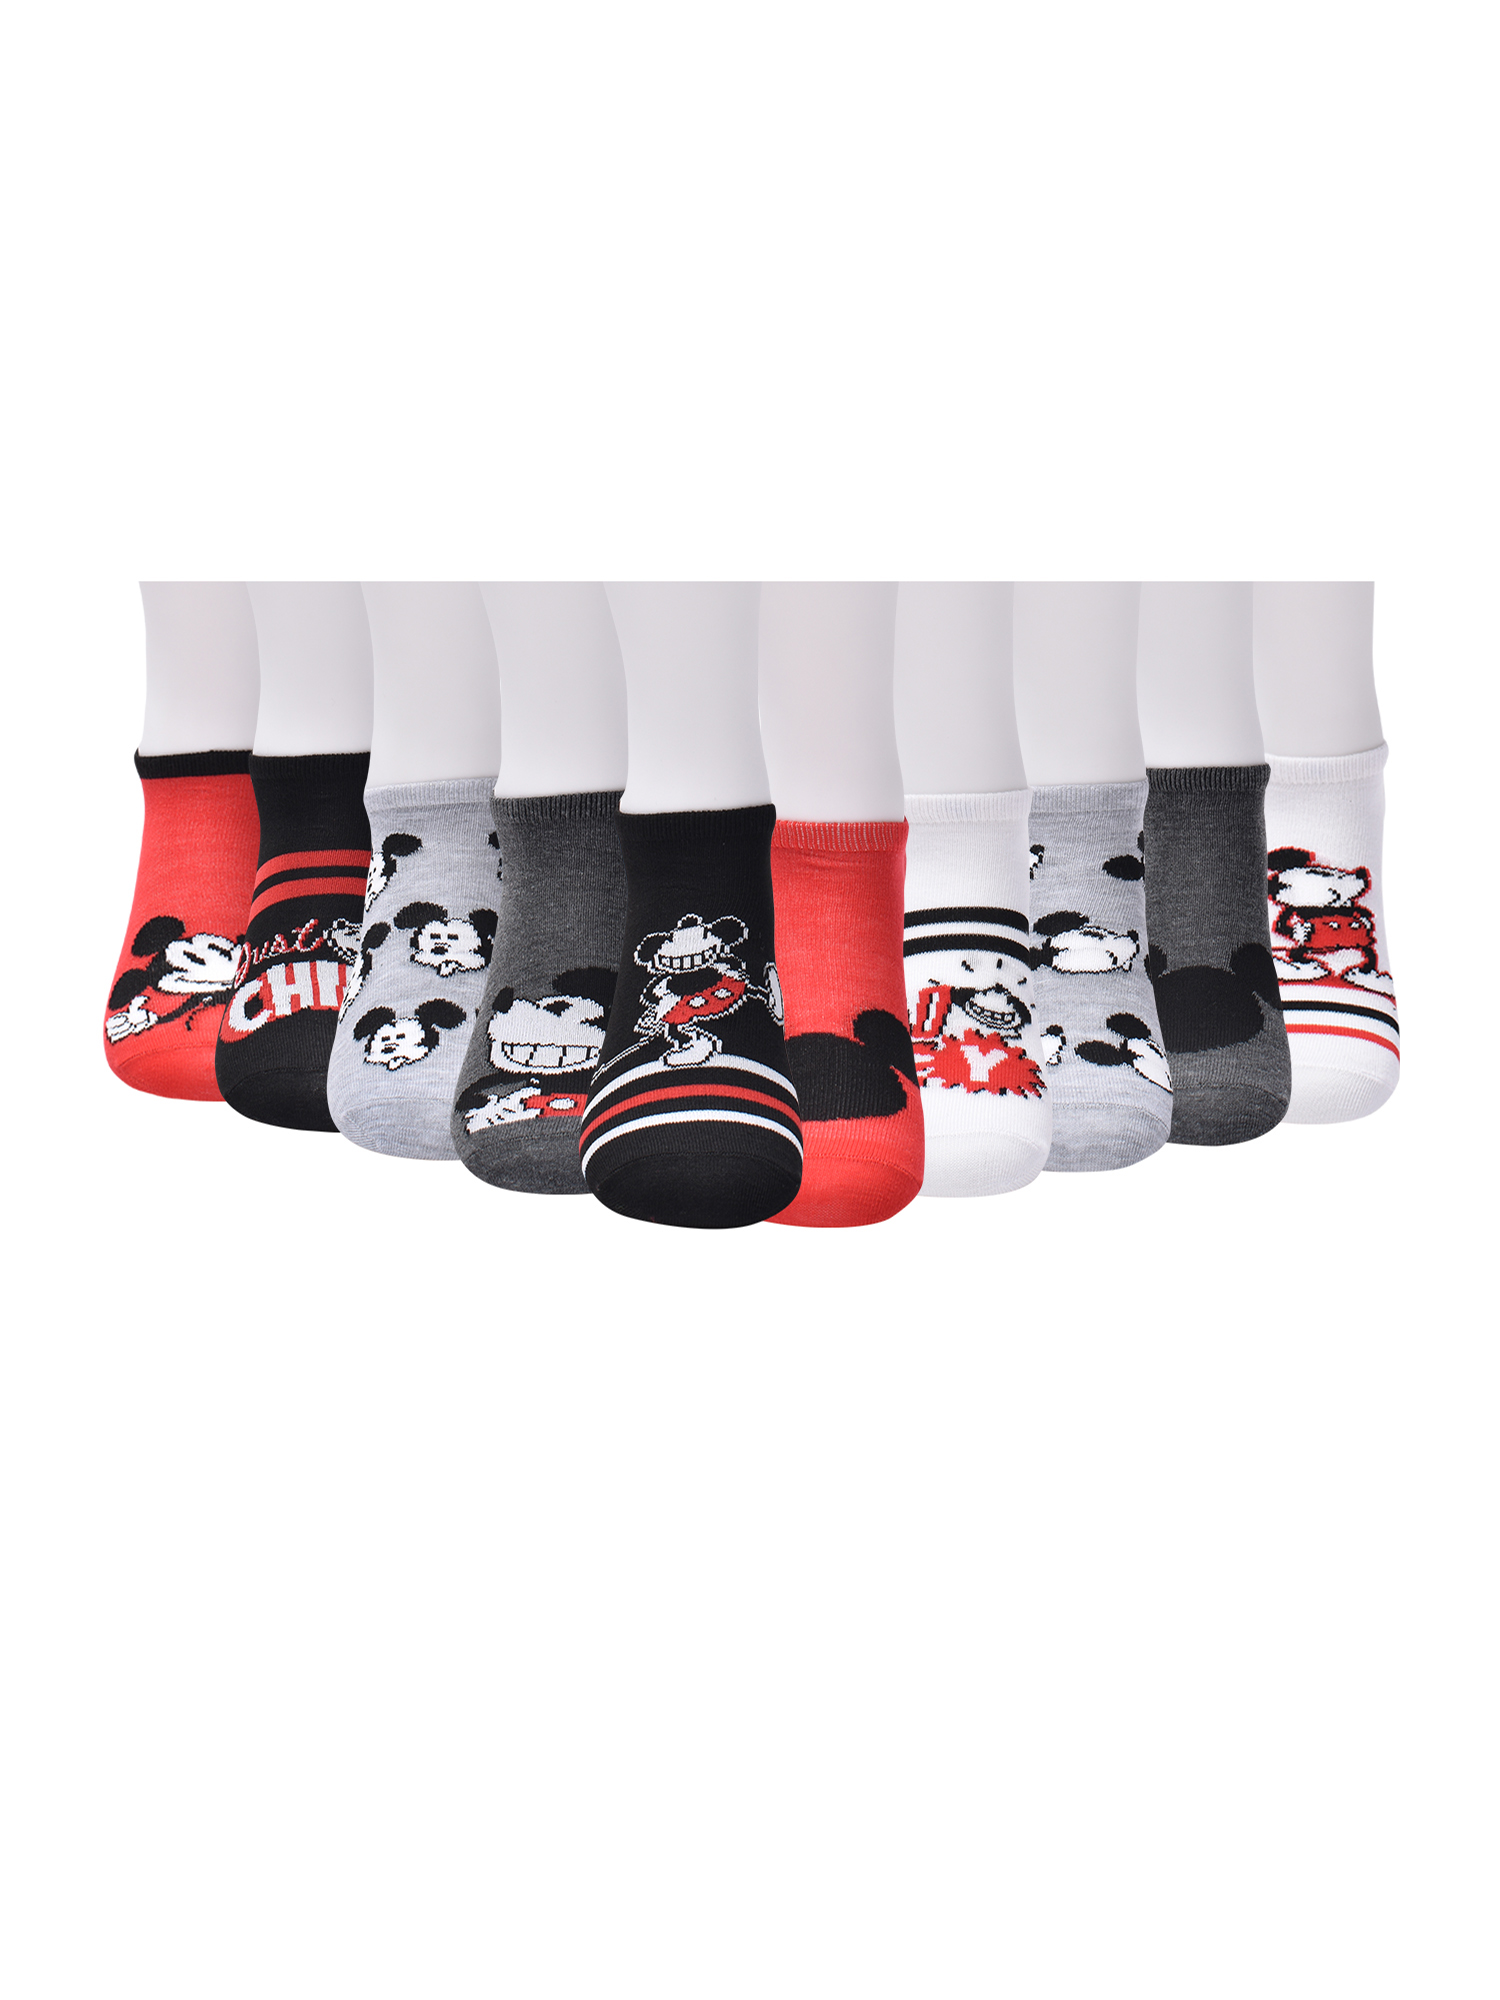 Disney Mickey Mouse Womens Graphic Super No Show Socks, 10-Pack, Sizes 4-10 - image 4 of 5